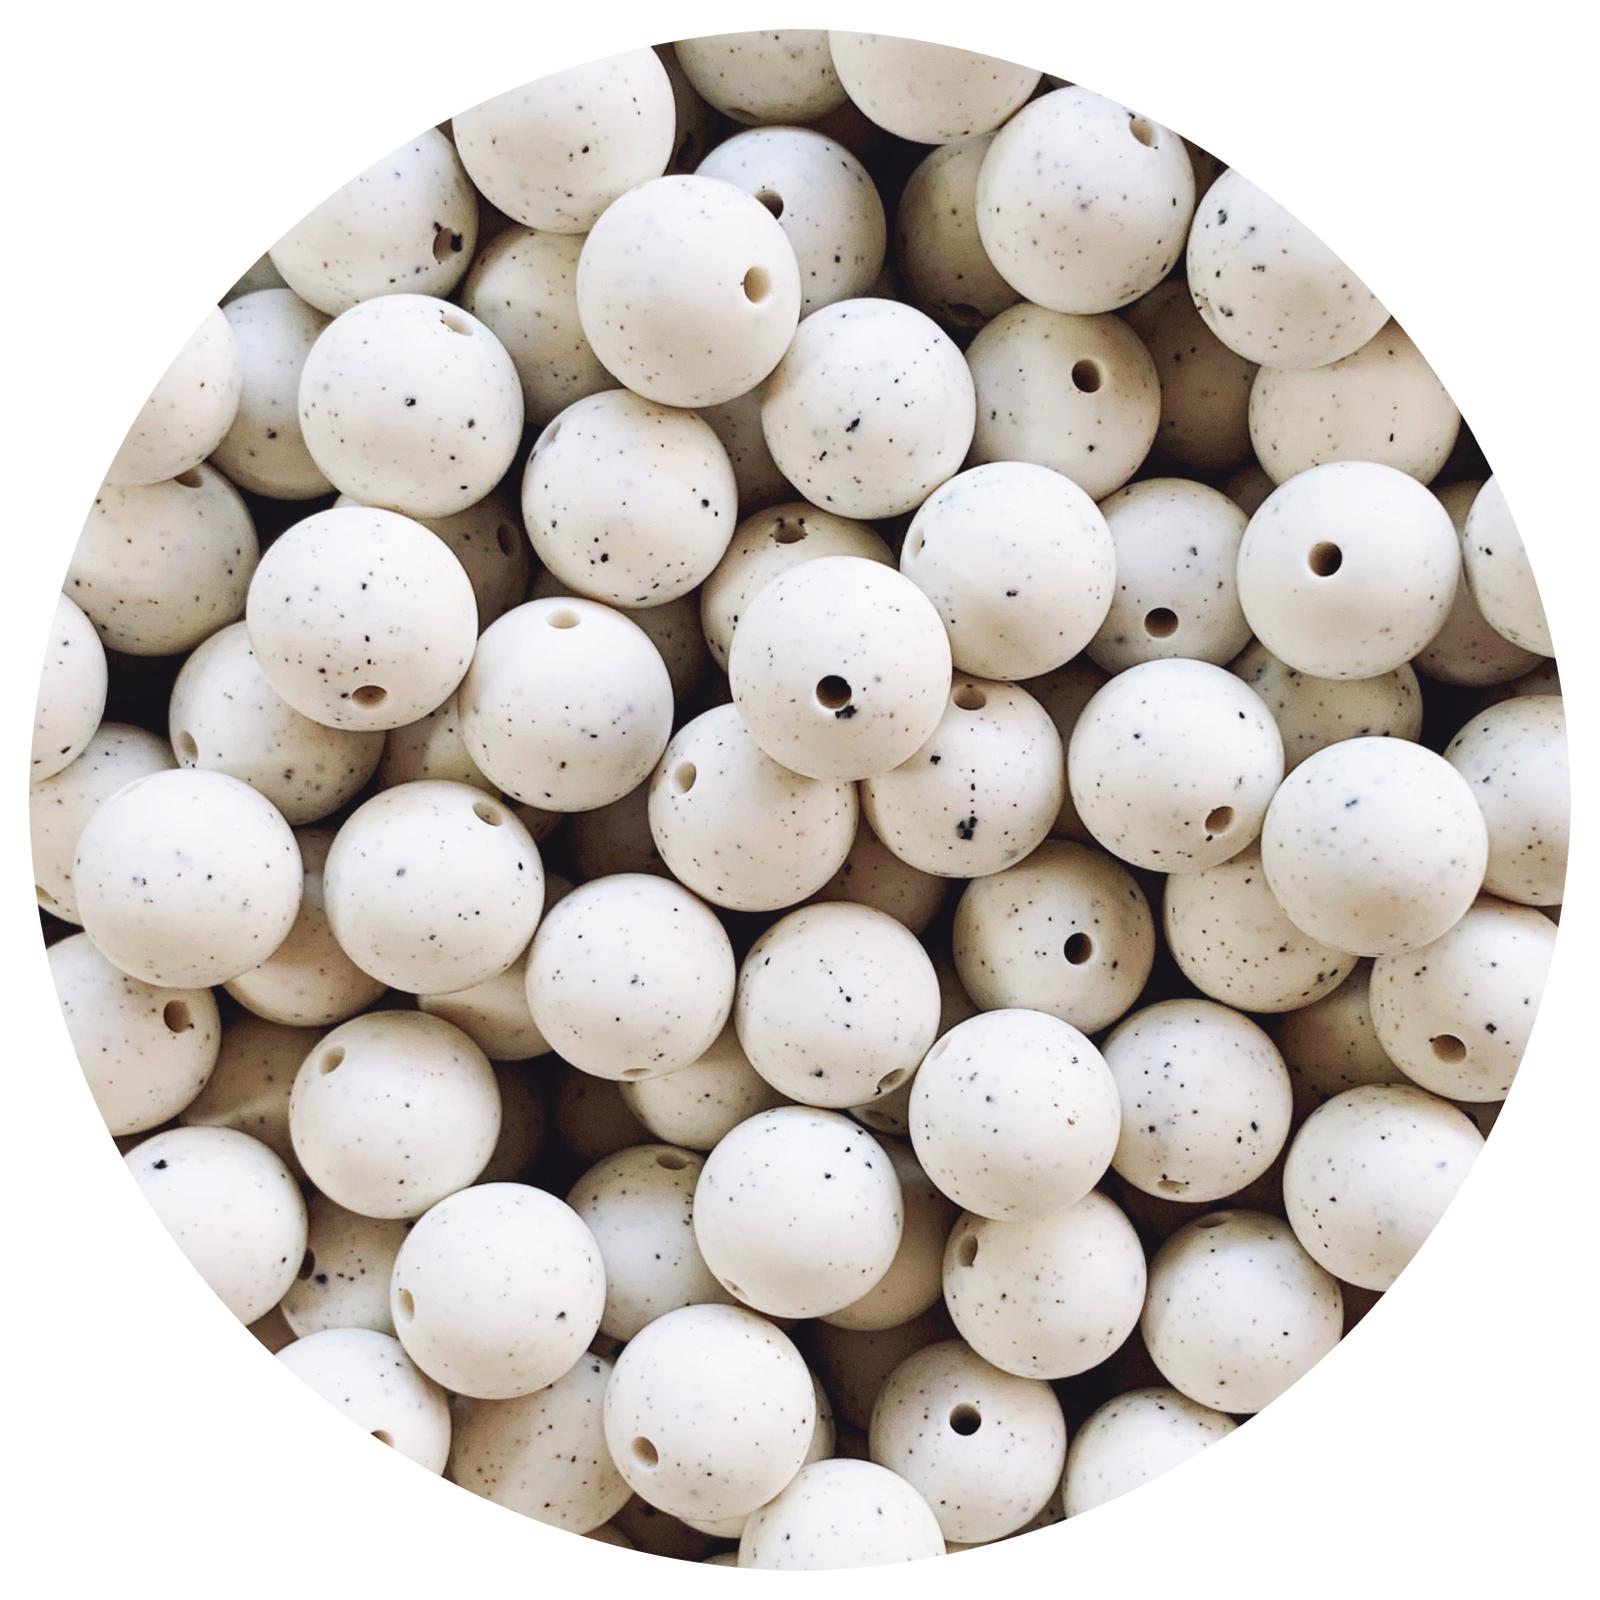 Linen Speckled - 15mm round - 10 Beads